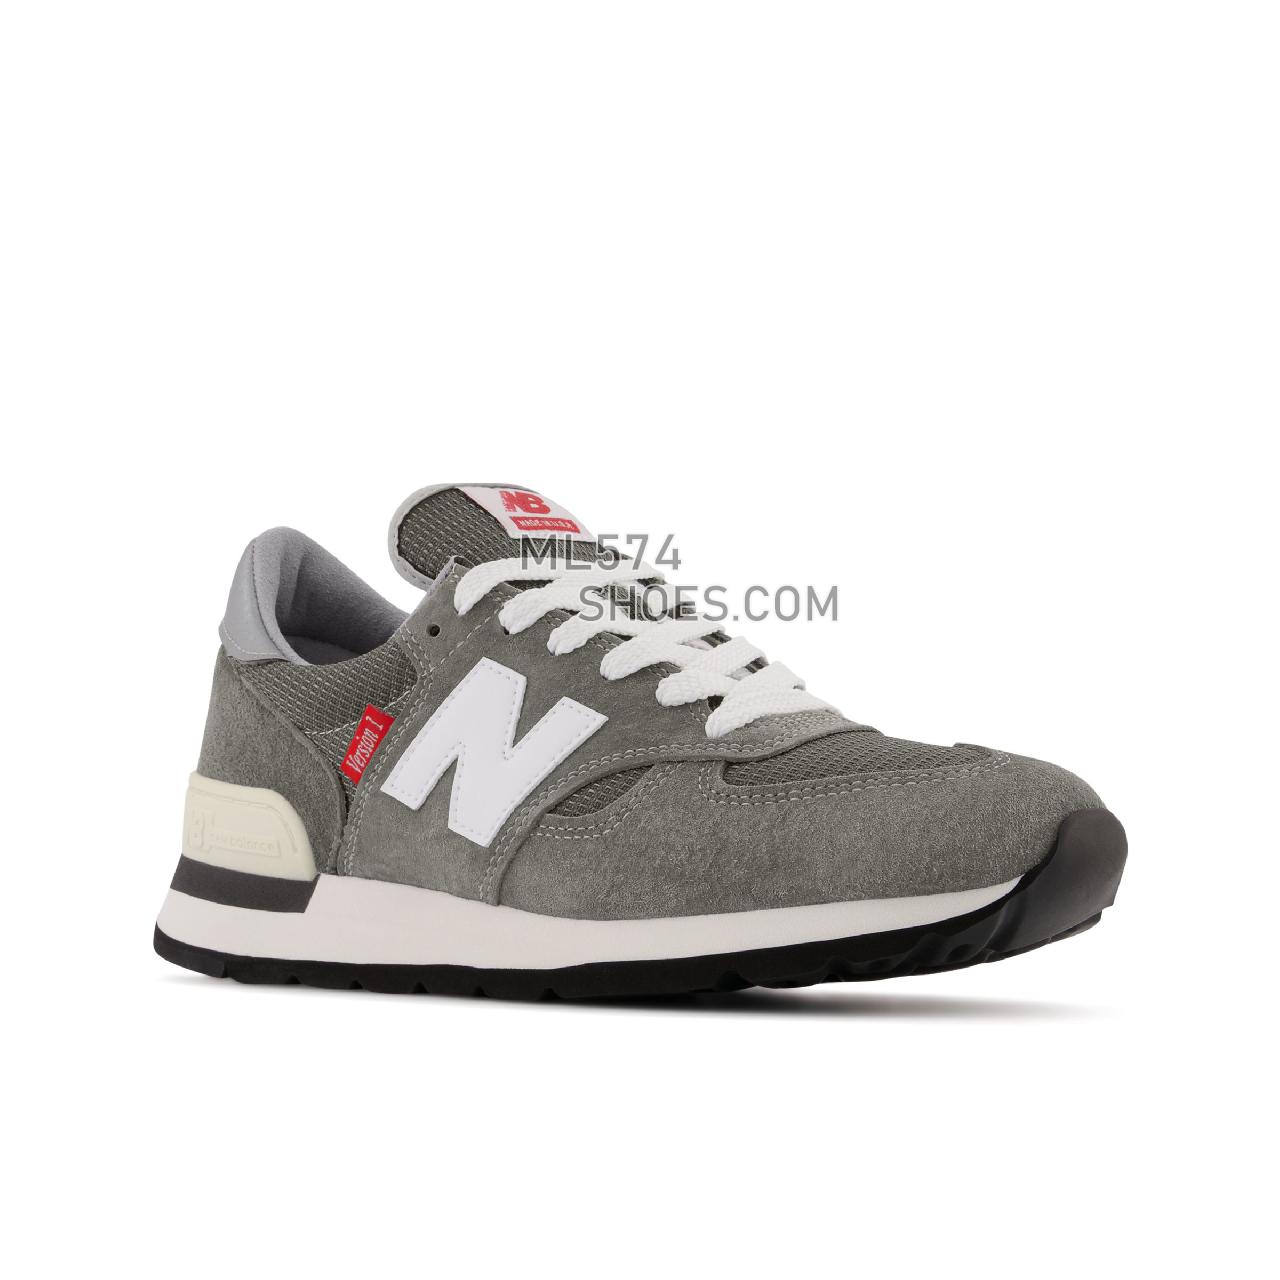 New Balance Made in USA 990 - Men's Made in USA And UK Sneakers - Grey with Red - M990VS1